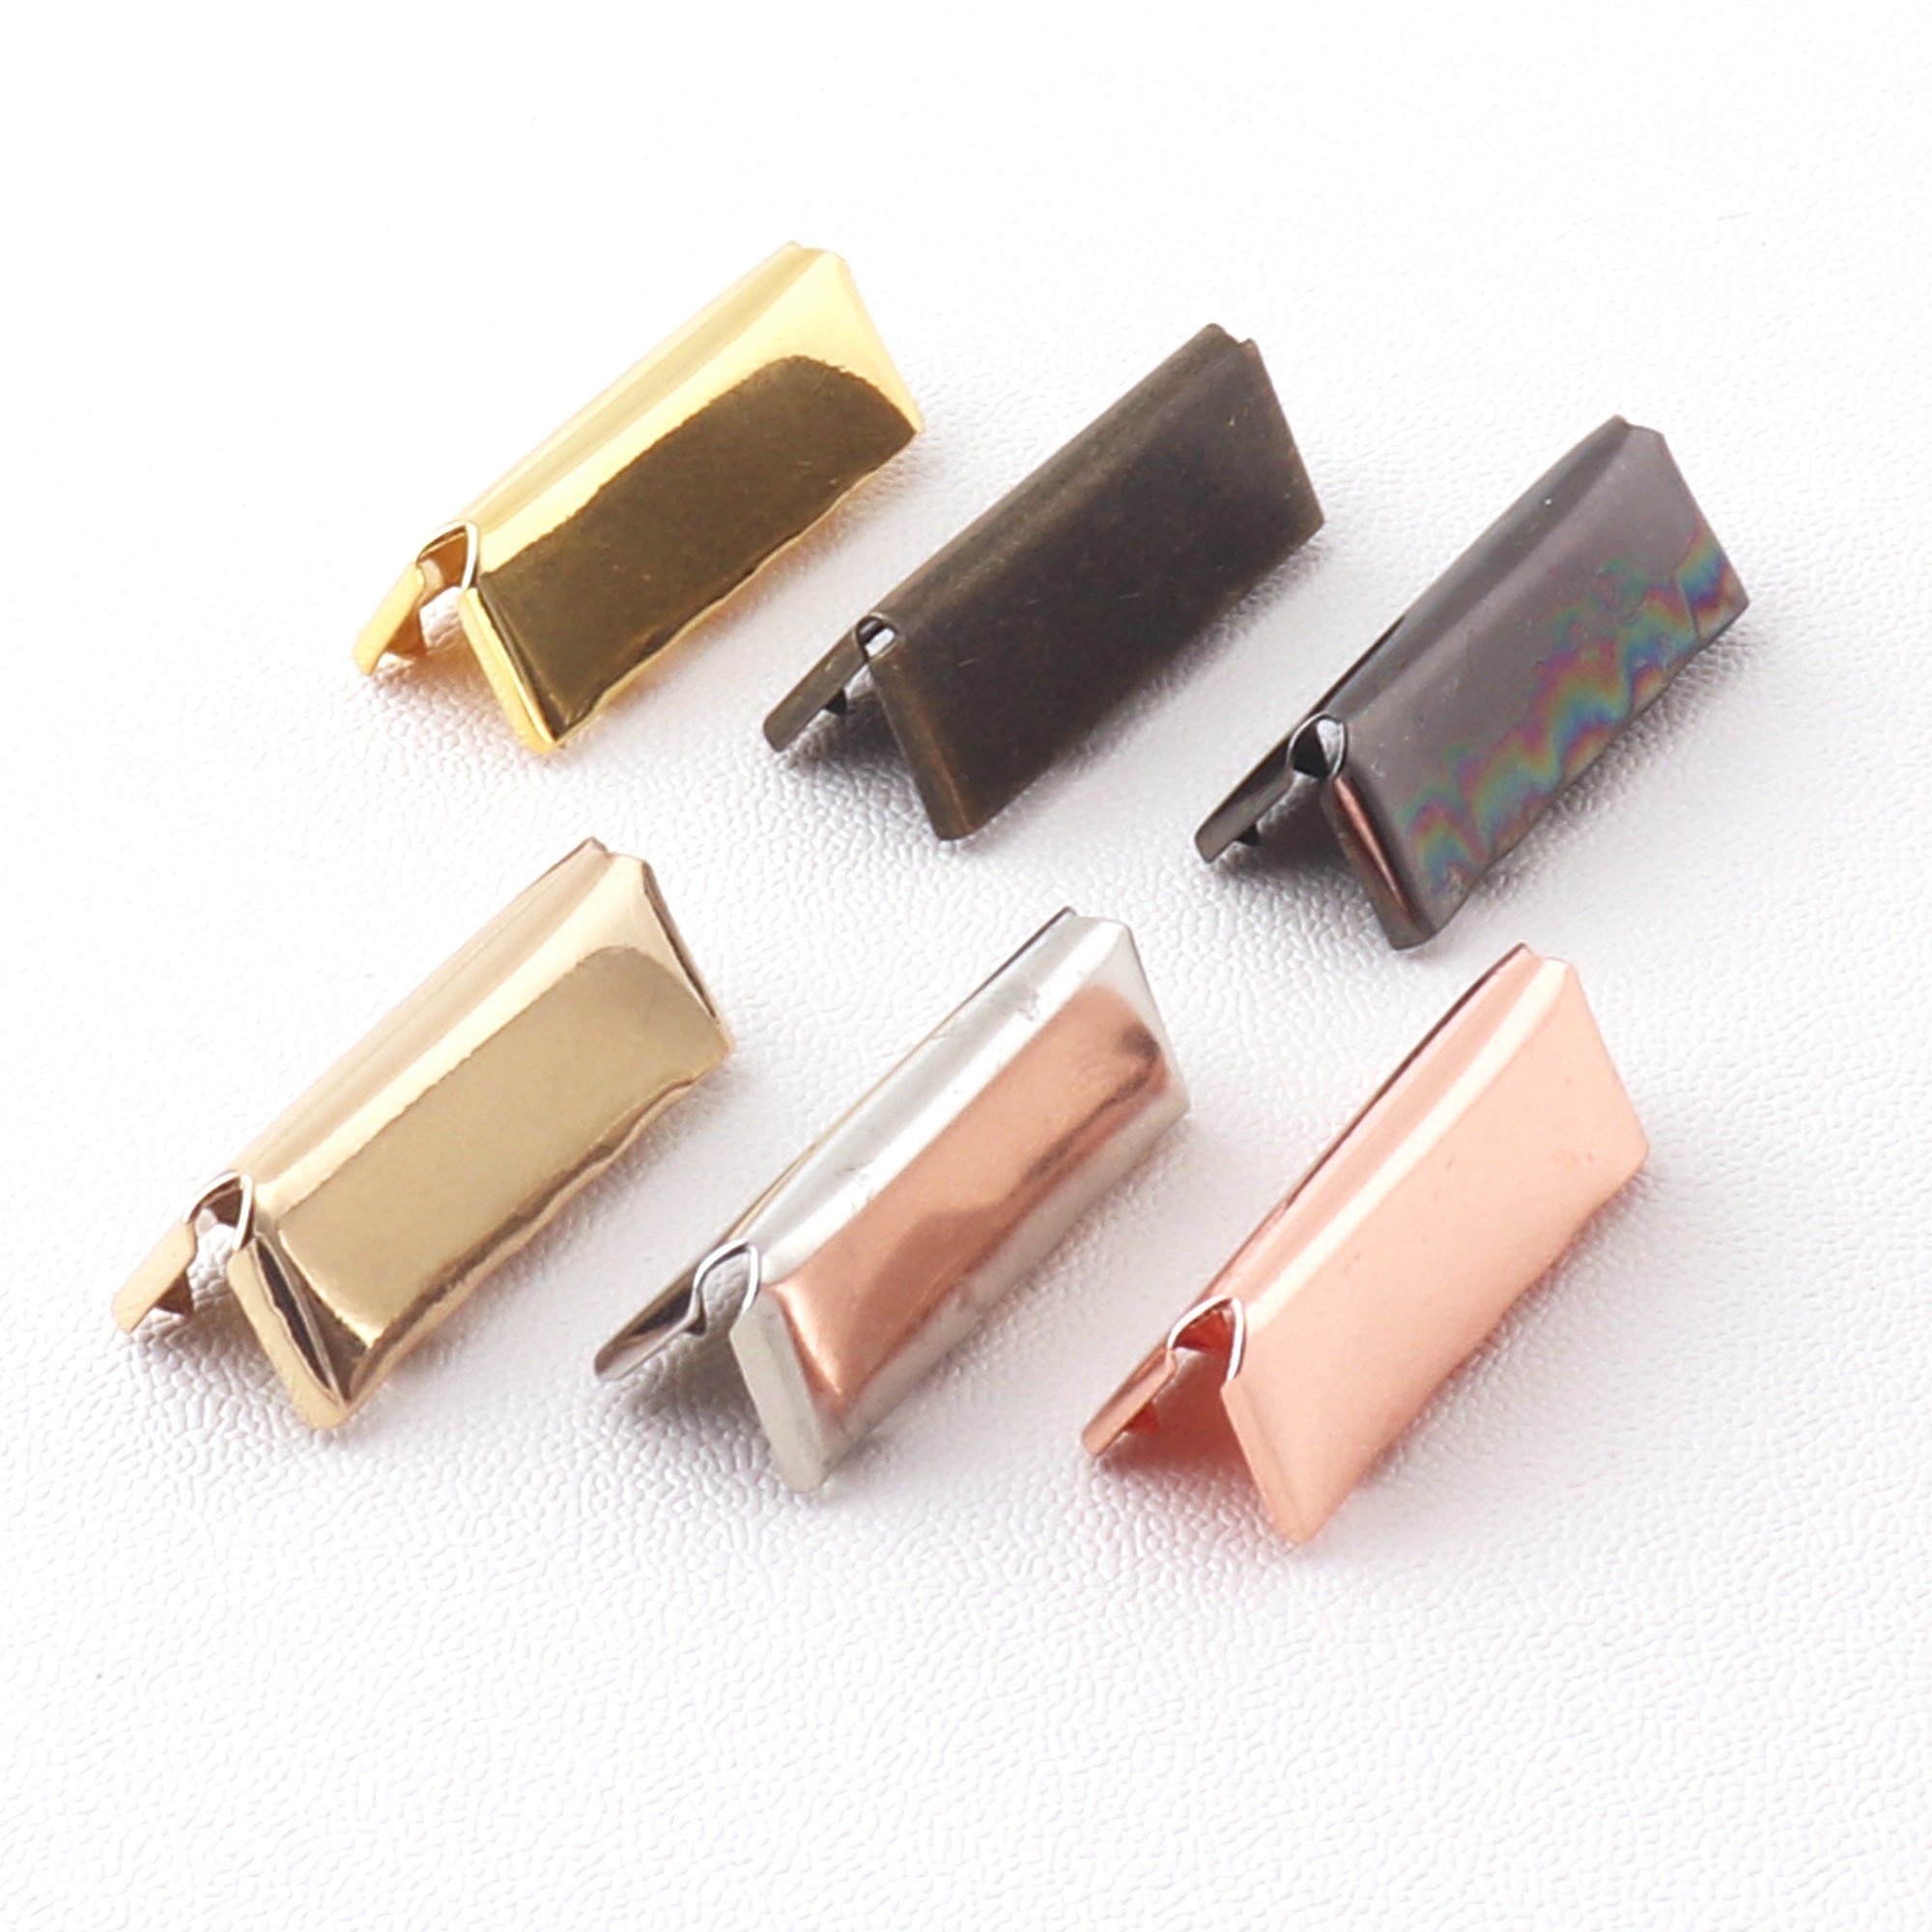 1Set 200PCS 25mm/ 35mm Long 5 Color Iron Ribbon Ends Bracelet Bookmark  Pinch Crimp Clamp End Findings Clasp Leather Cord Ends Jewelry Making  Findings